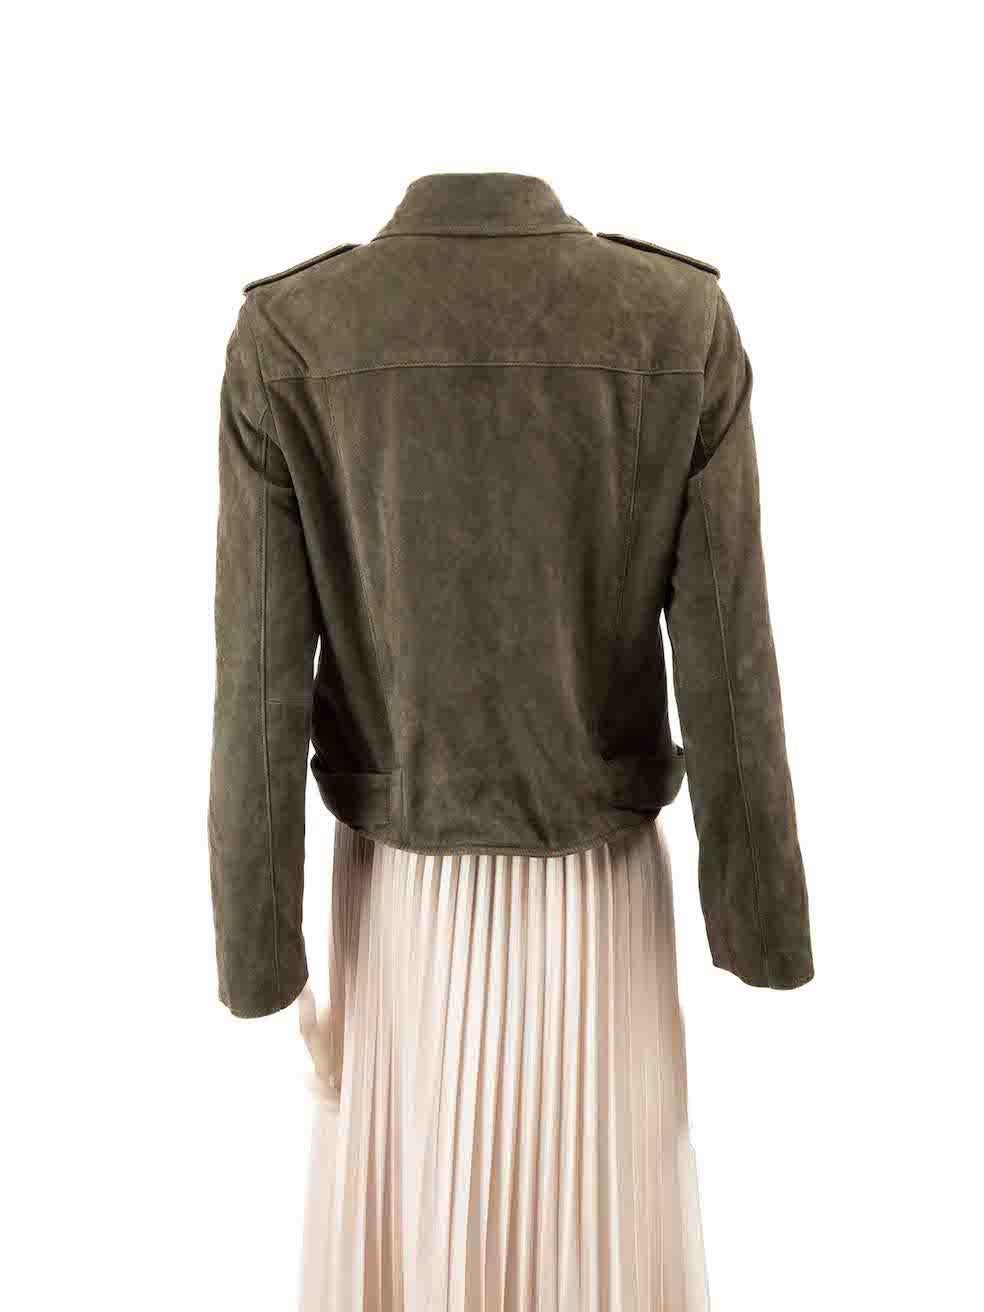 All Saints Khaki Suede Zipped Biker Jacket Size XL In Good Condition For Sale In London, GB